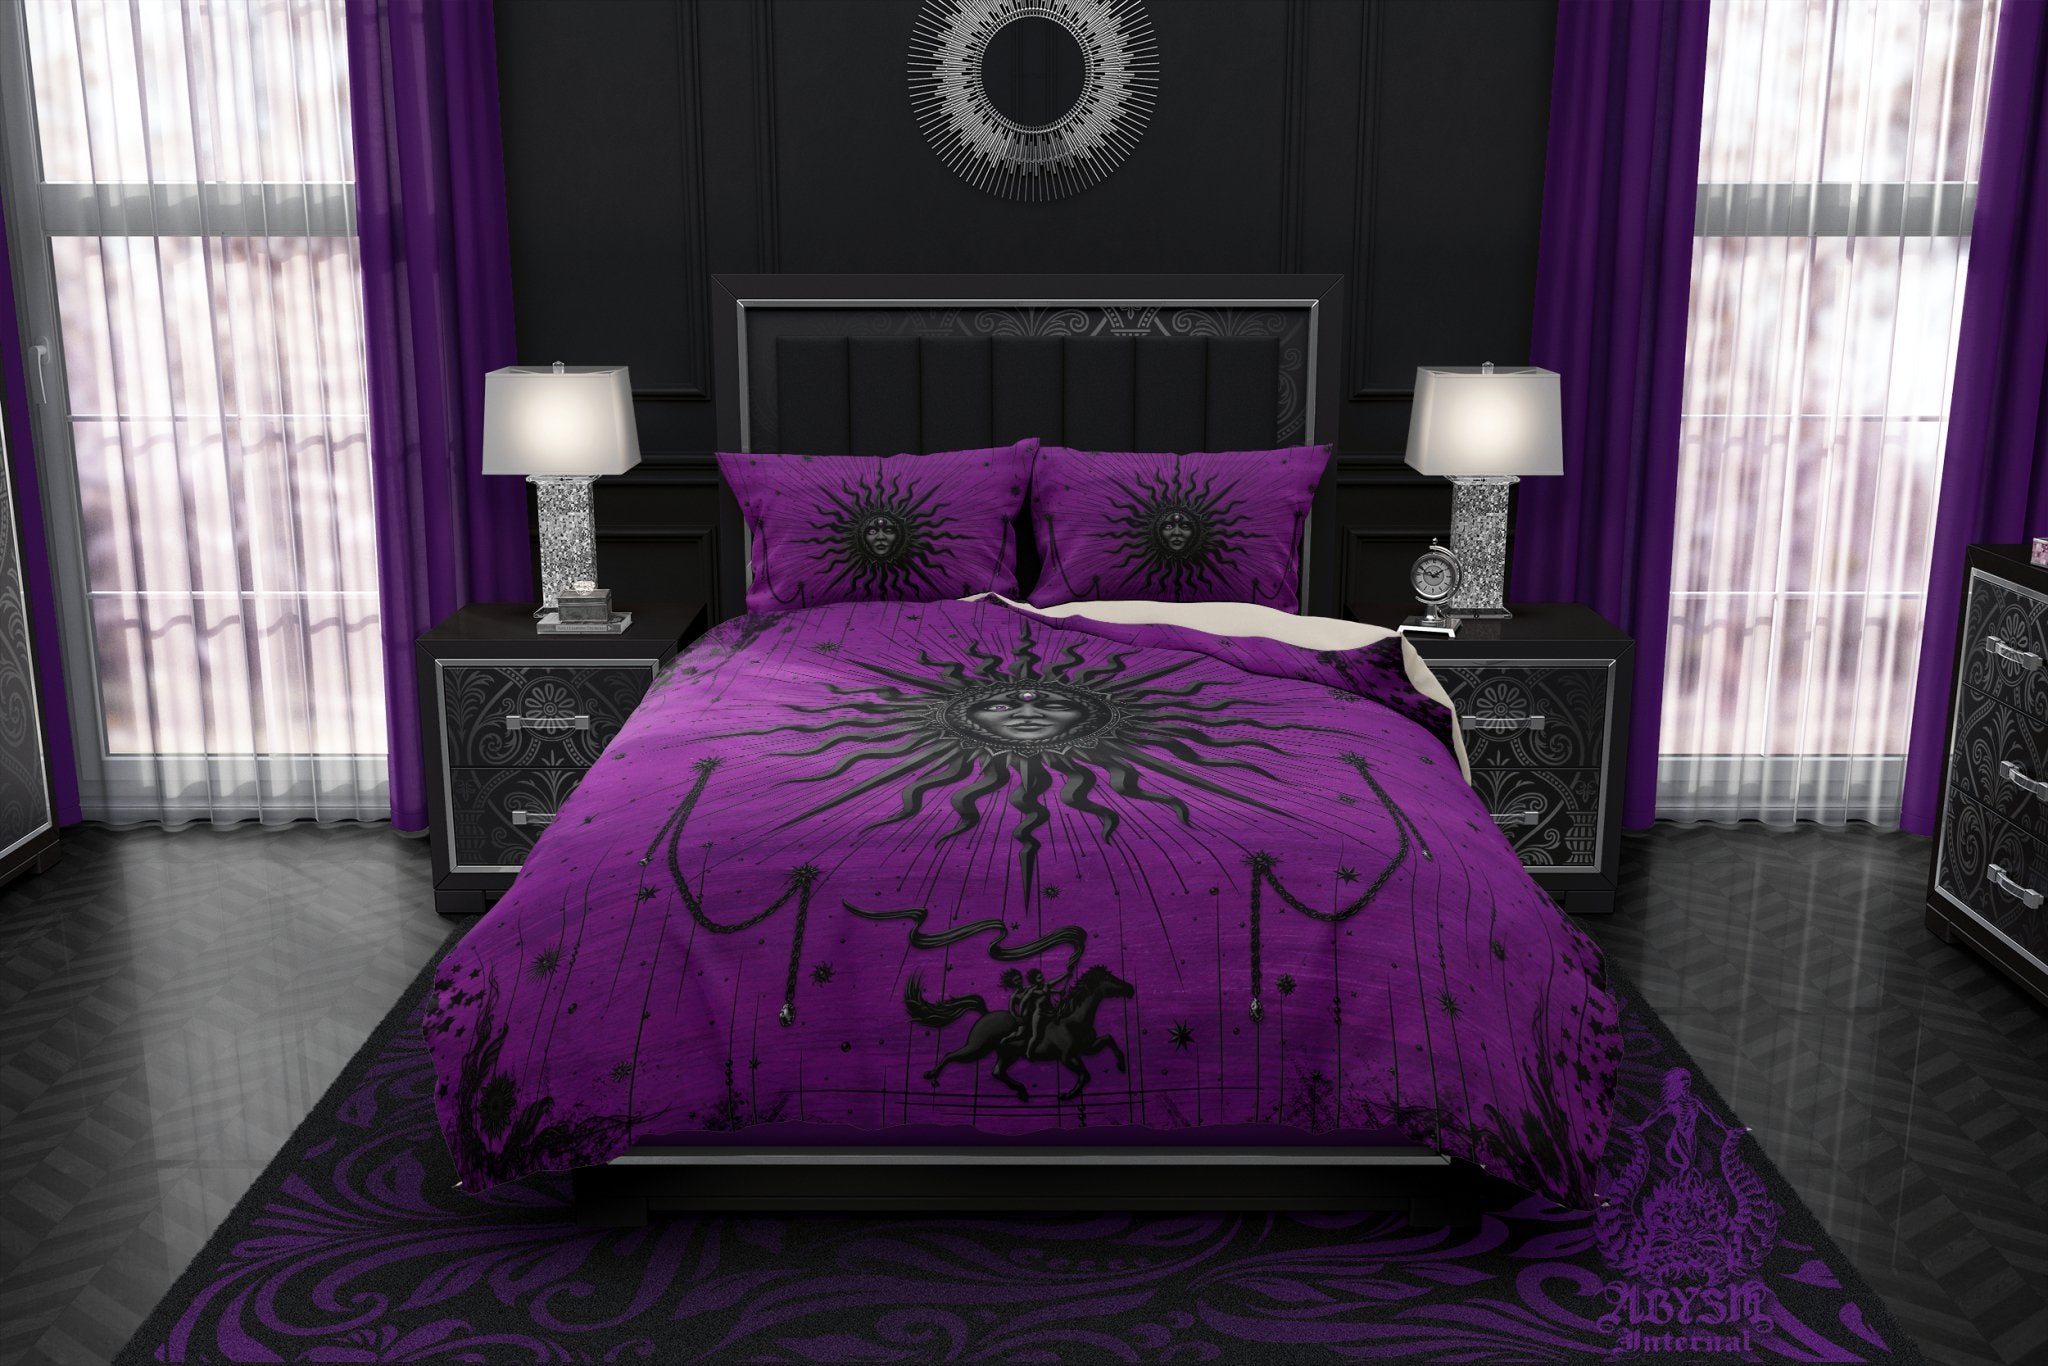 Whimsigoth Sun Duvet Cover, Bed Covering, Pastel Goth Comforter, Purple and Black Bedroom Decor King, Queen & Twin Bedding Set - Tarot Arcana Art - Abysm Internal